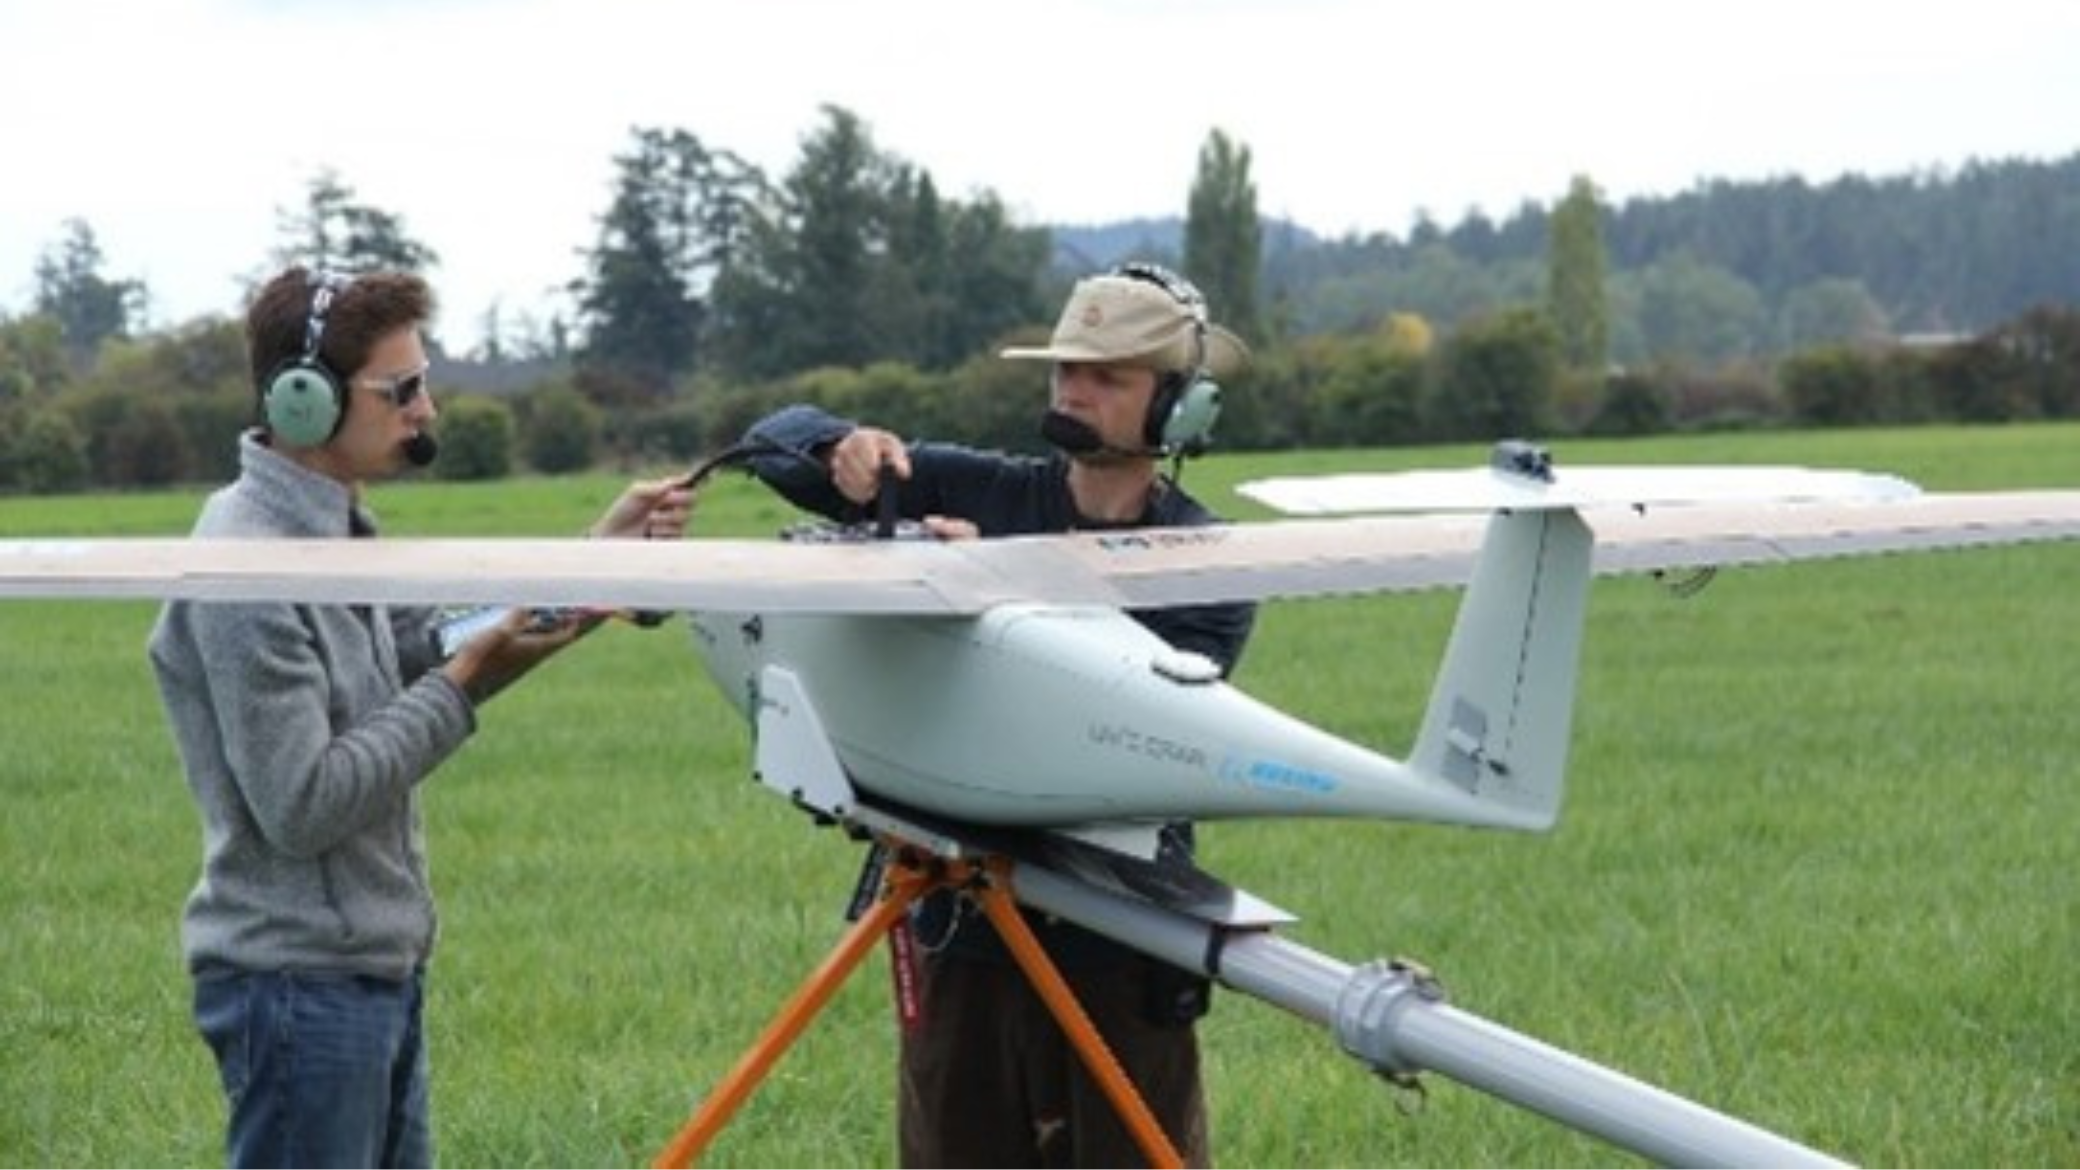 Image of two men working in a drone on a field